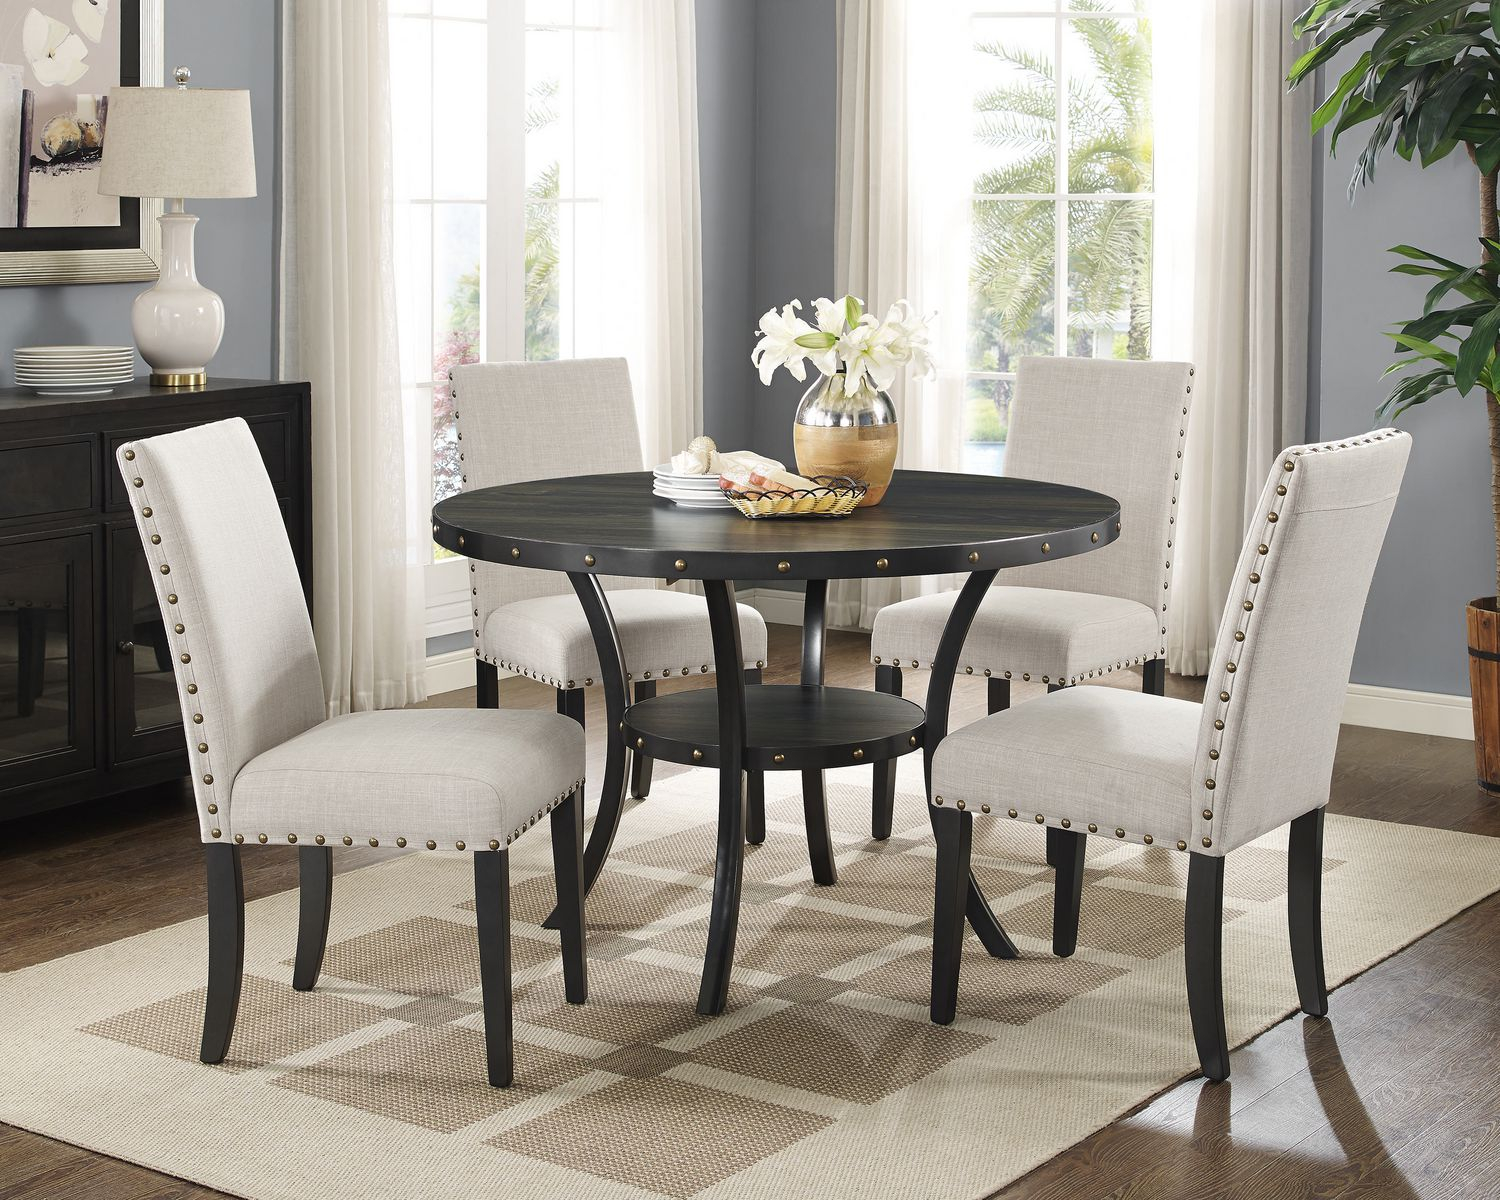 Brassex Inc Indira 5 Piece Dining Set Table 4 Chairs Beige throughout proportions 1500 X 1200